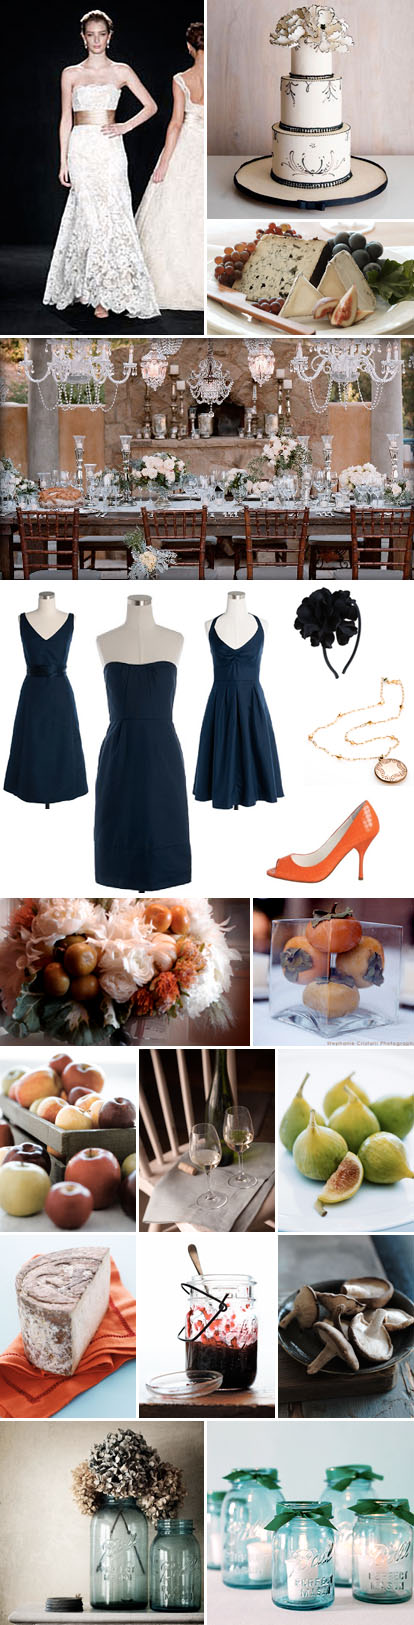 navy blue, cream and orange wedding color palette for a rustic and elegant fall foodie wedding